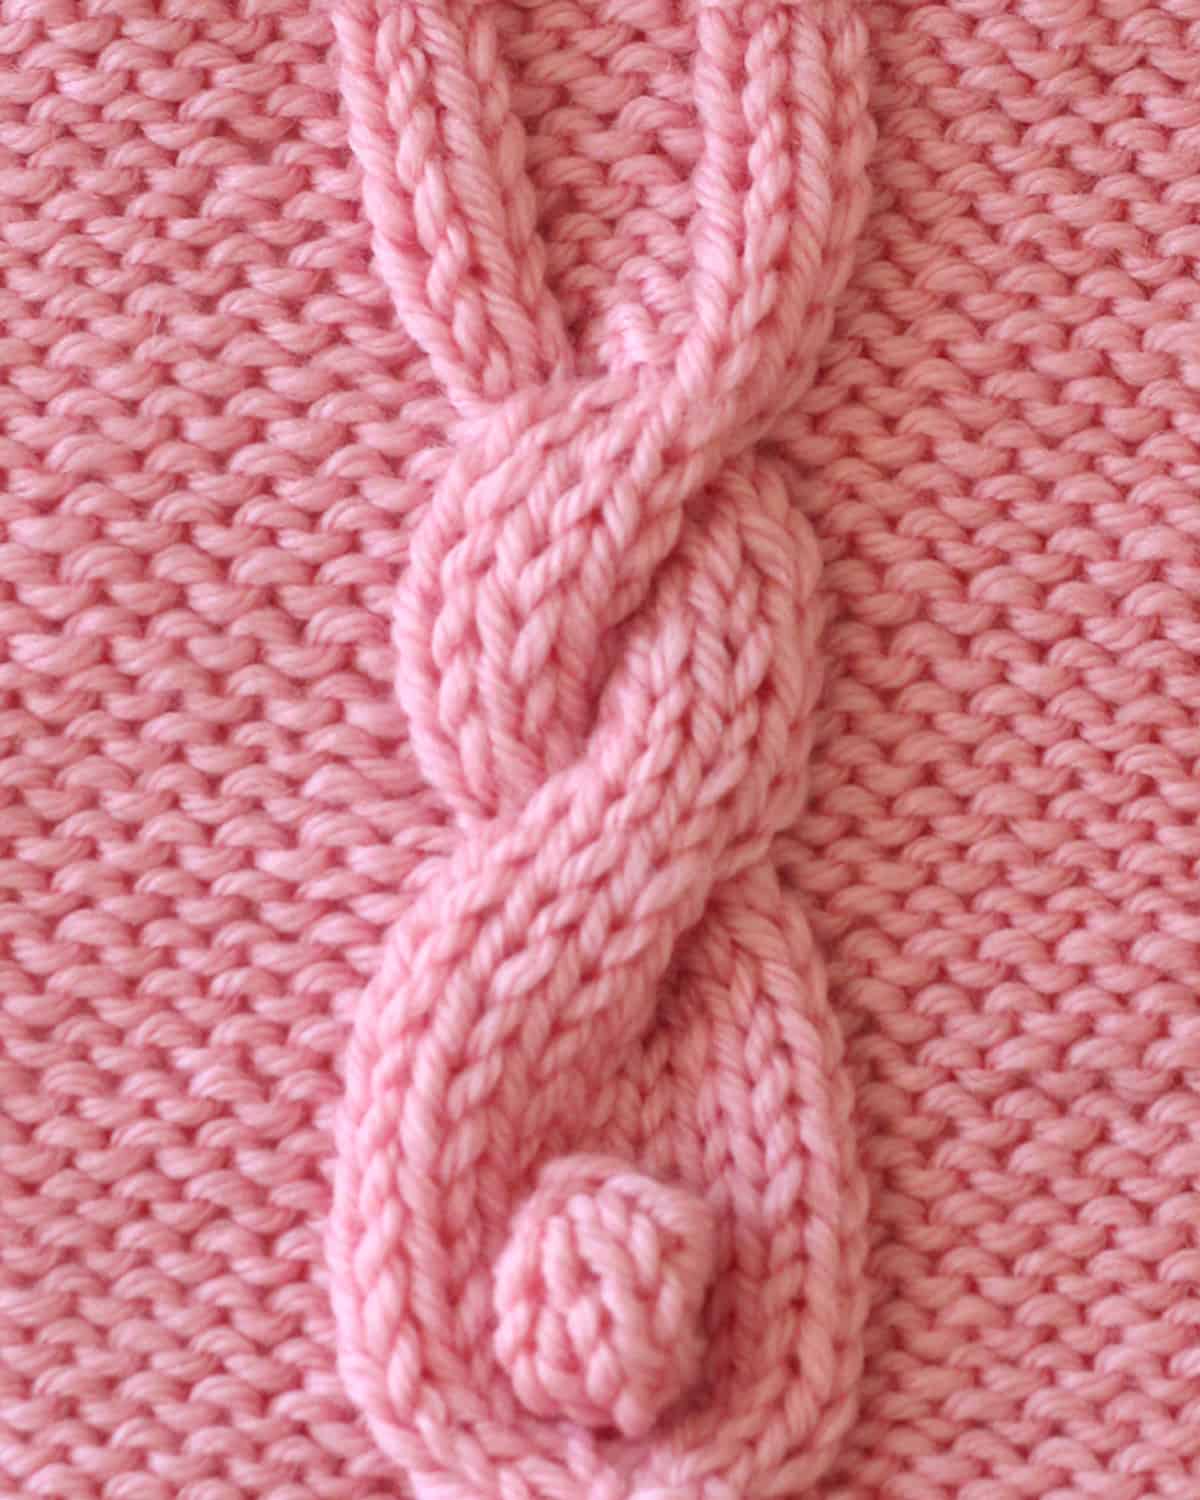 Bunny Cable knitting square in pink yarn color.